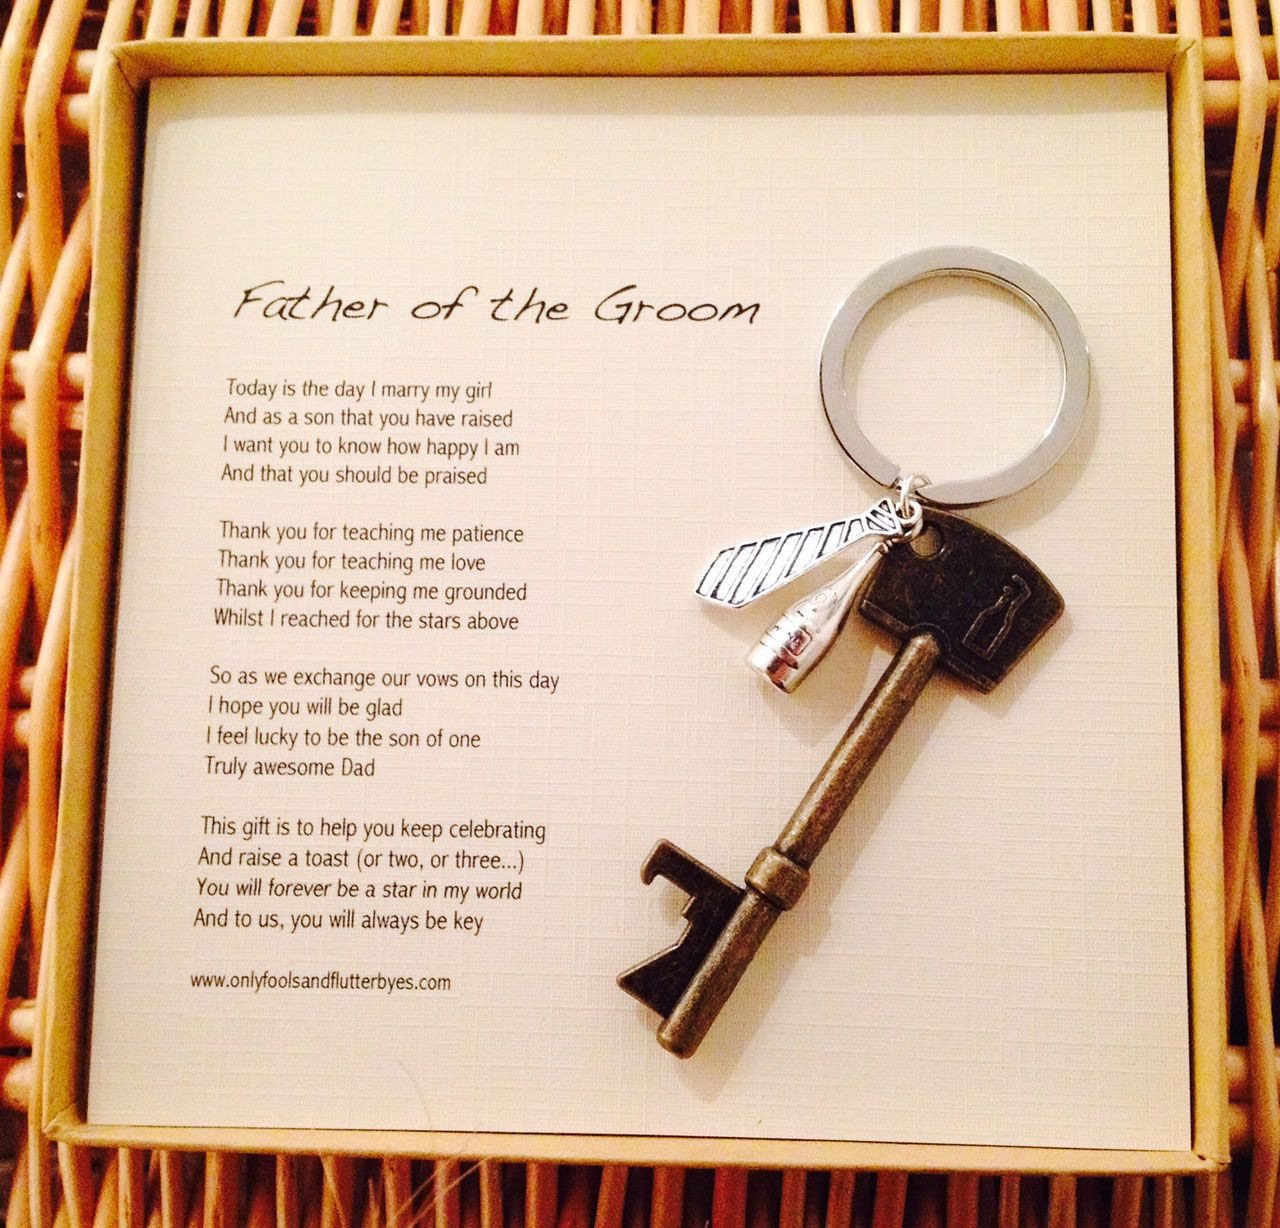 Gift Ideas For Father Of The Groom
 Father of the Groom Wedding Party Gifts